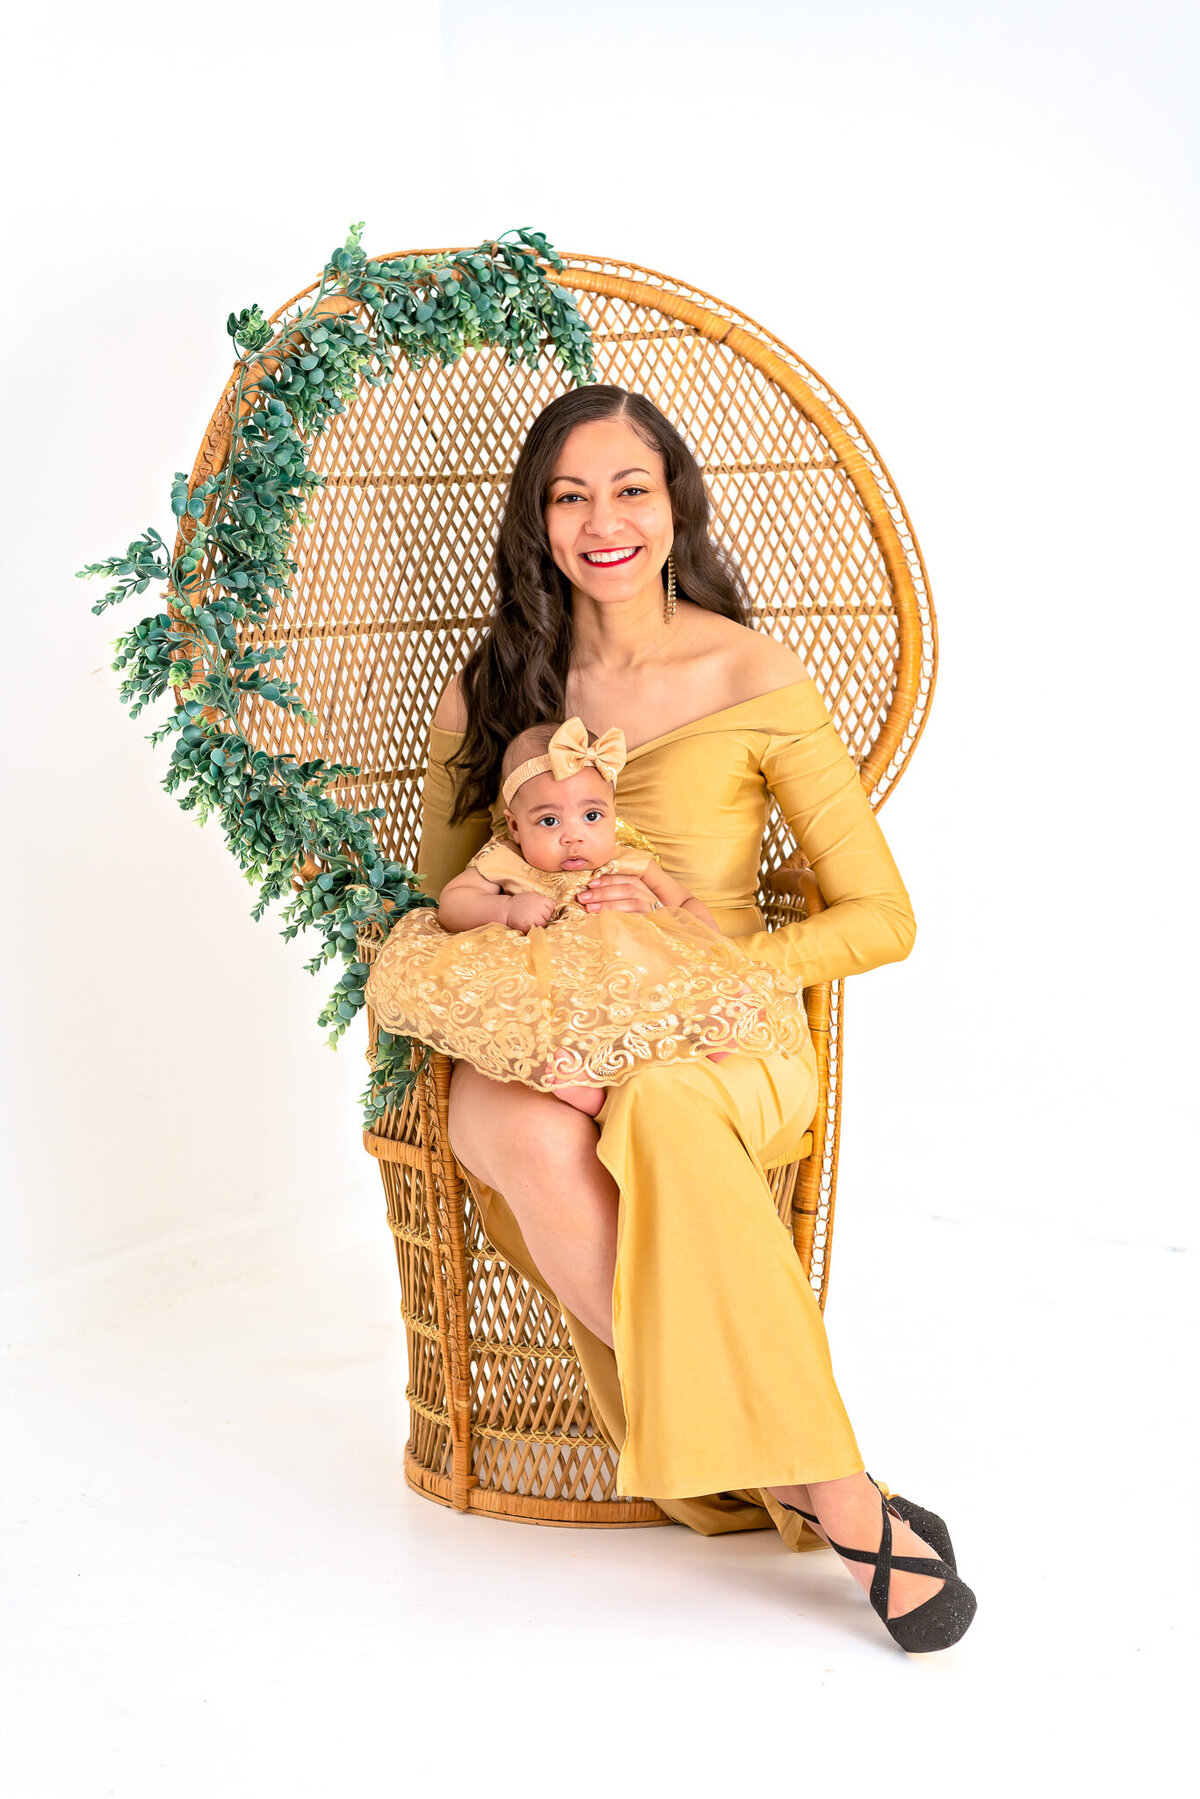 A mom in a gold, formal dress is holding her young baby as they sit in a peacock chair at a photography studio.